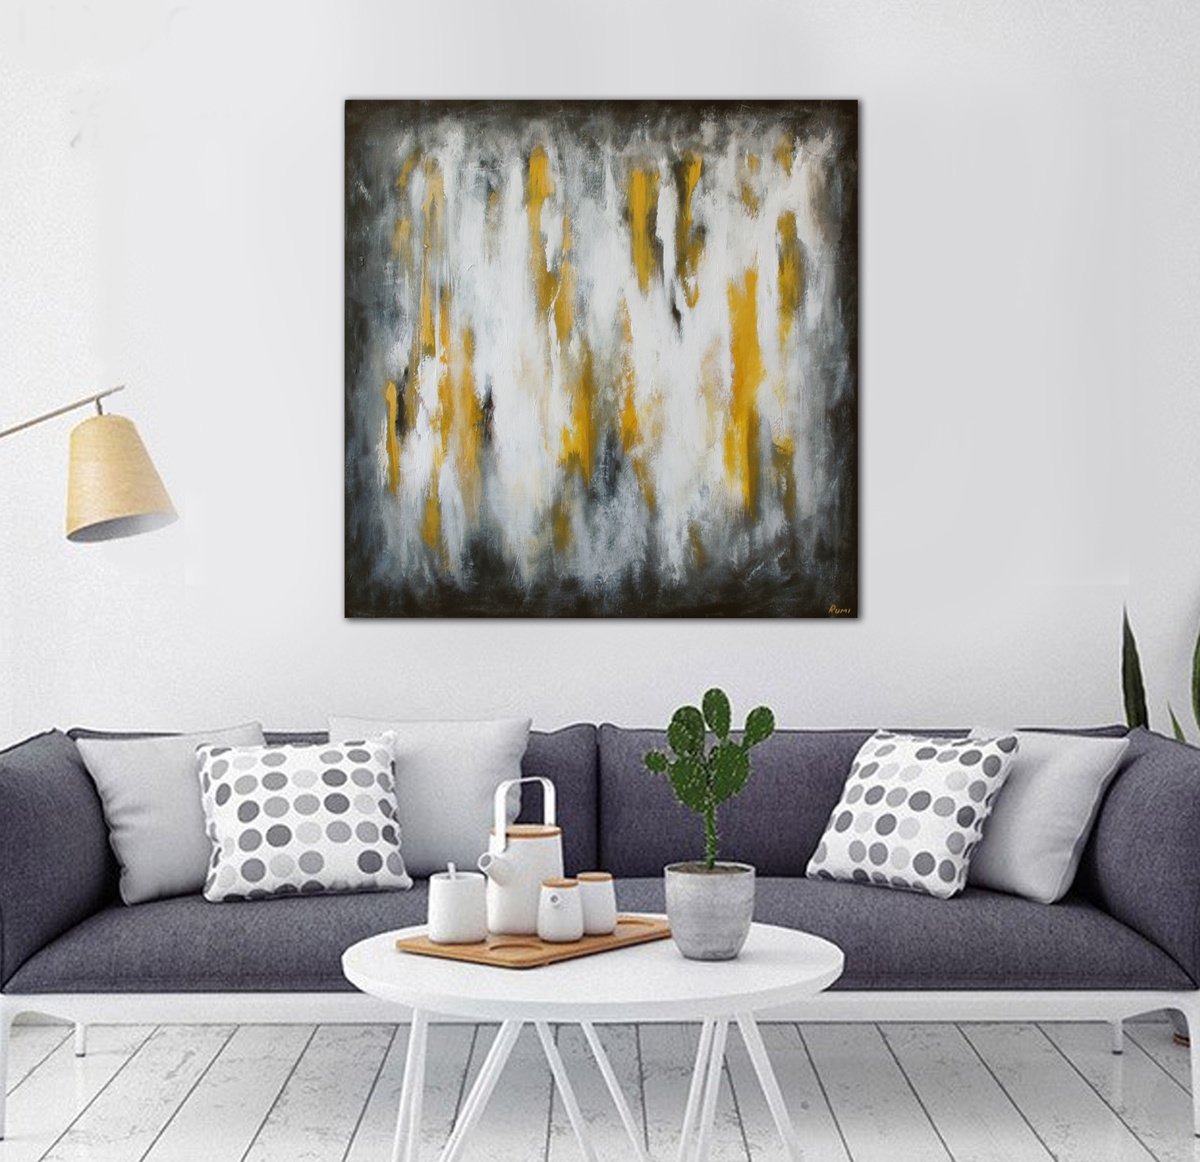 ABSTRACT #070. Large Abstract Painting. by Rumen Spasov